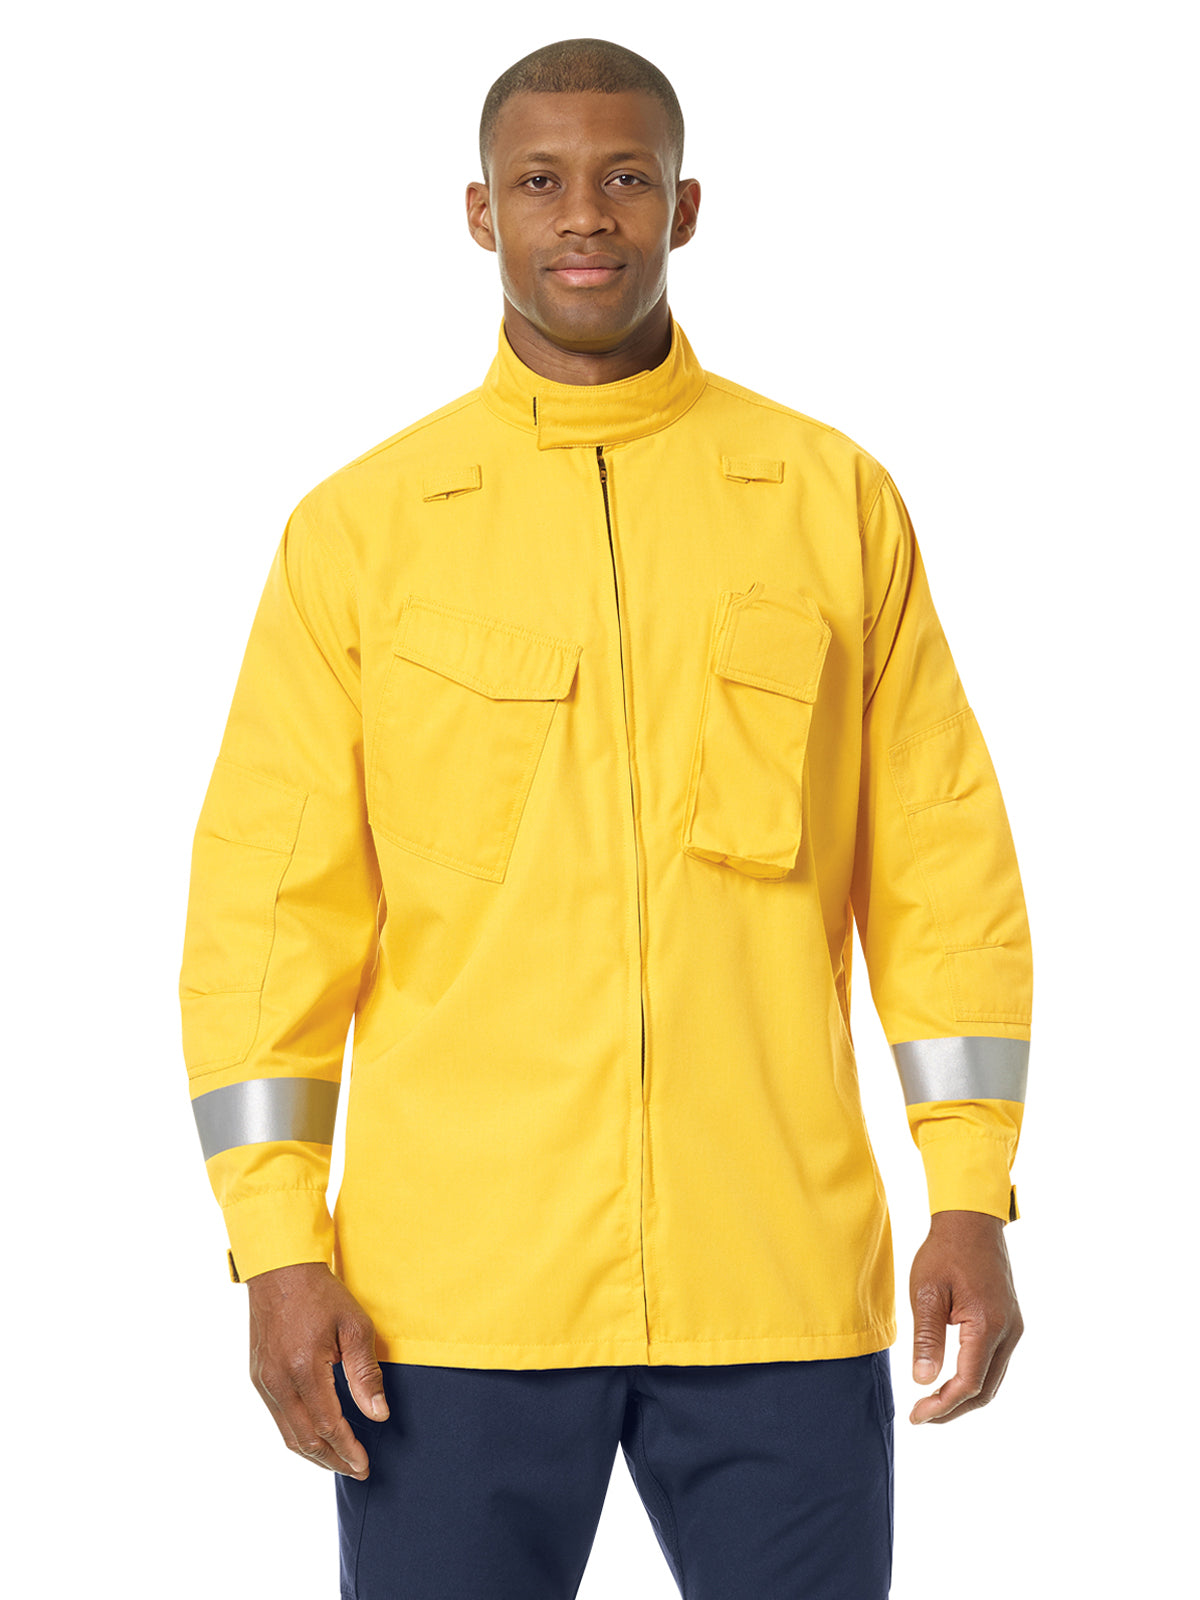 Men's Relaxed Fit Wildland Jacket - FW81 - Yellow